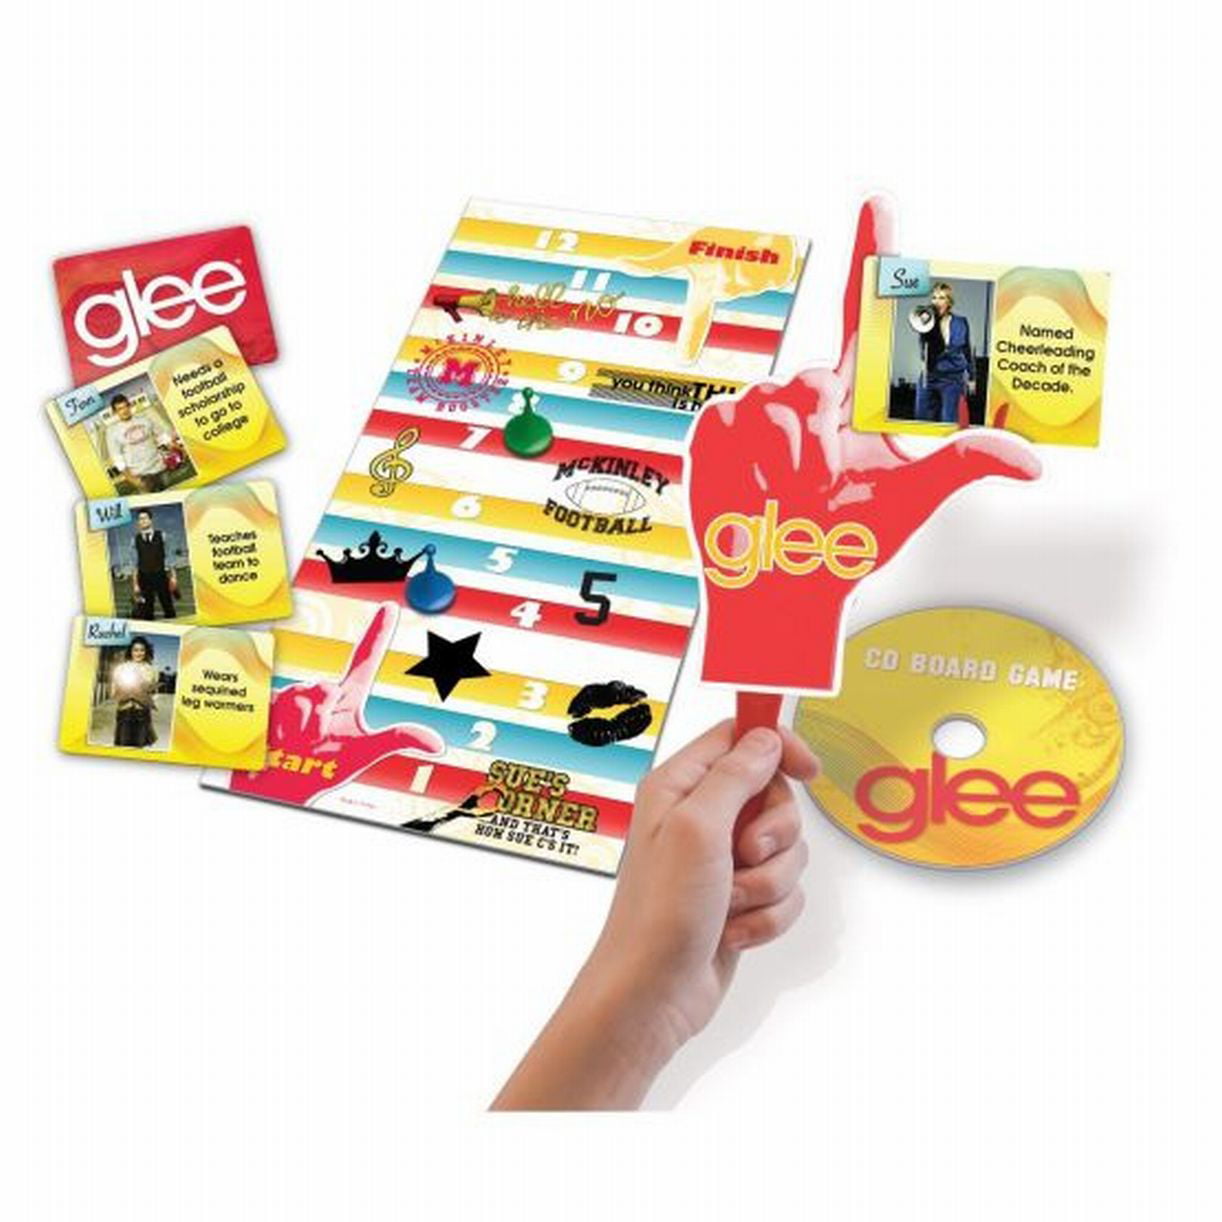 Glee CD Board Game Cardinal Ages 13 2010 for sale online 